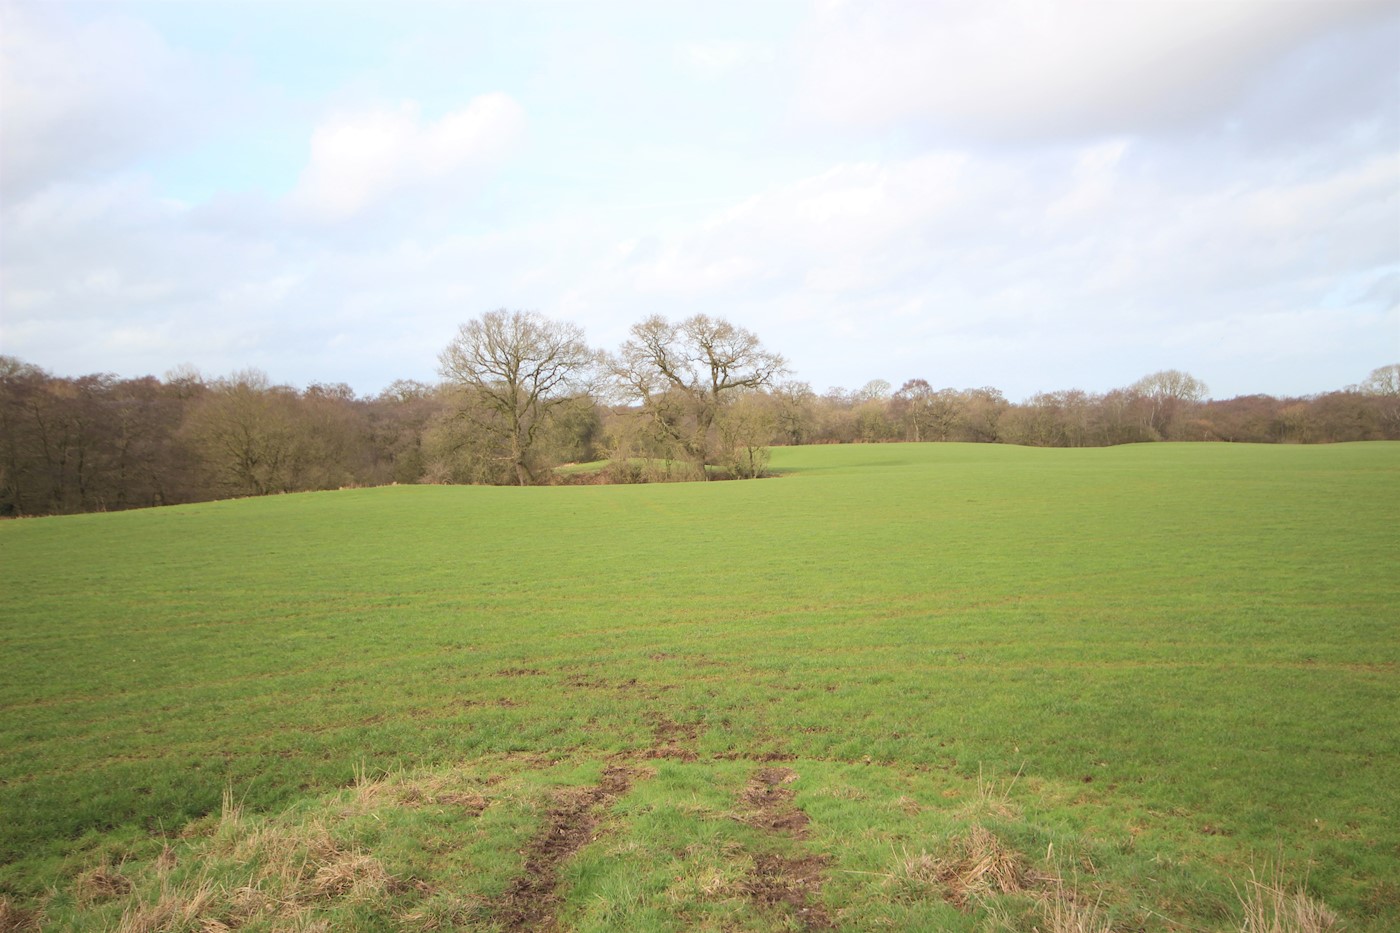 Land at Fenns Bank off Long Lane (A495), Whitchurch, SY13 3PE 1/5